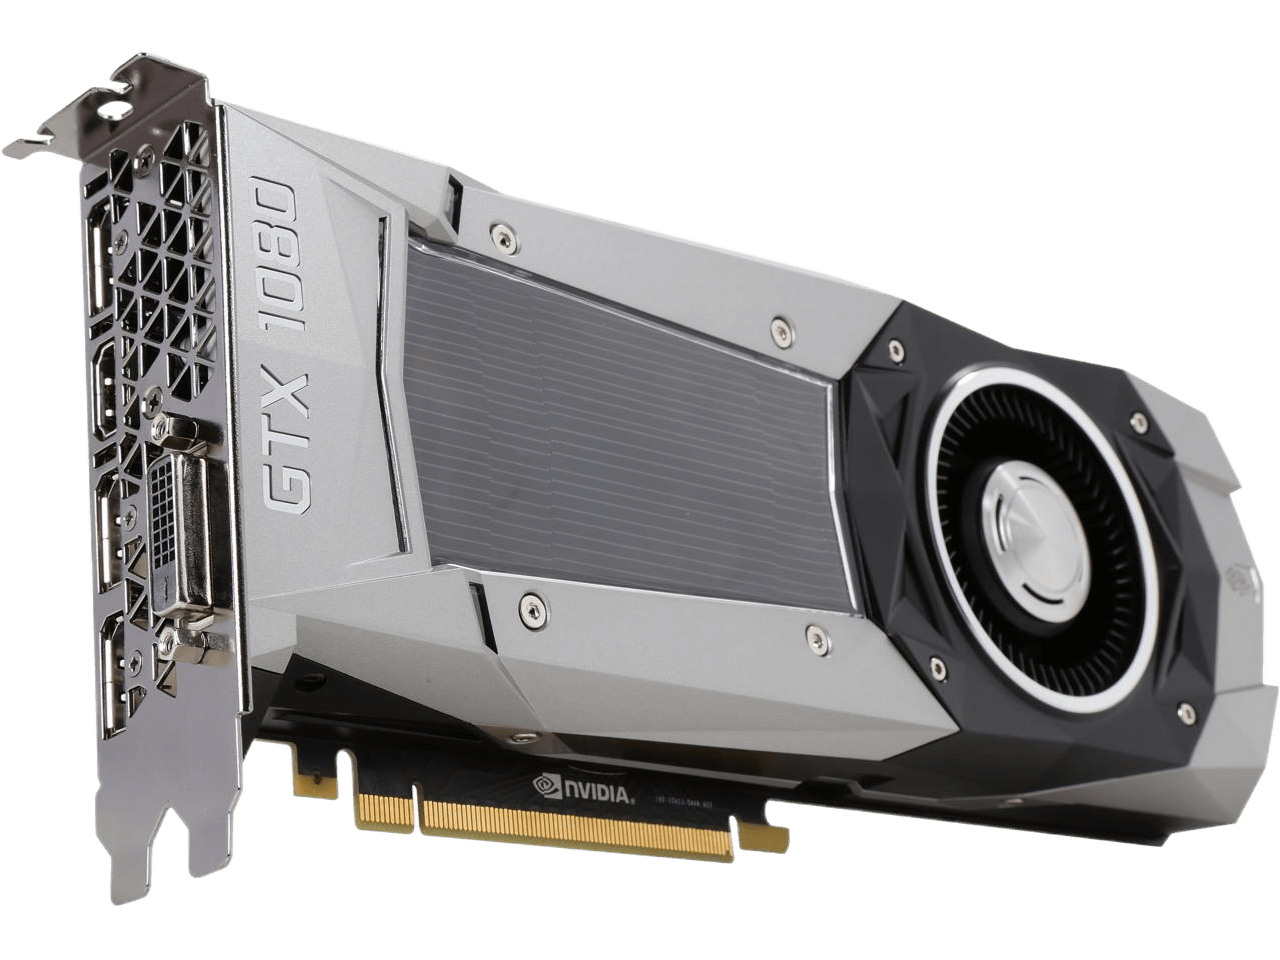 NVIDIA GeForce GTX 1080 Founders Edition, 8GB GDDR5X PCI Express 3.0 Graphics Card